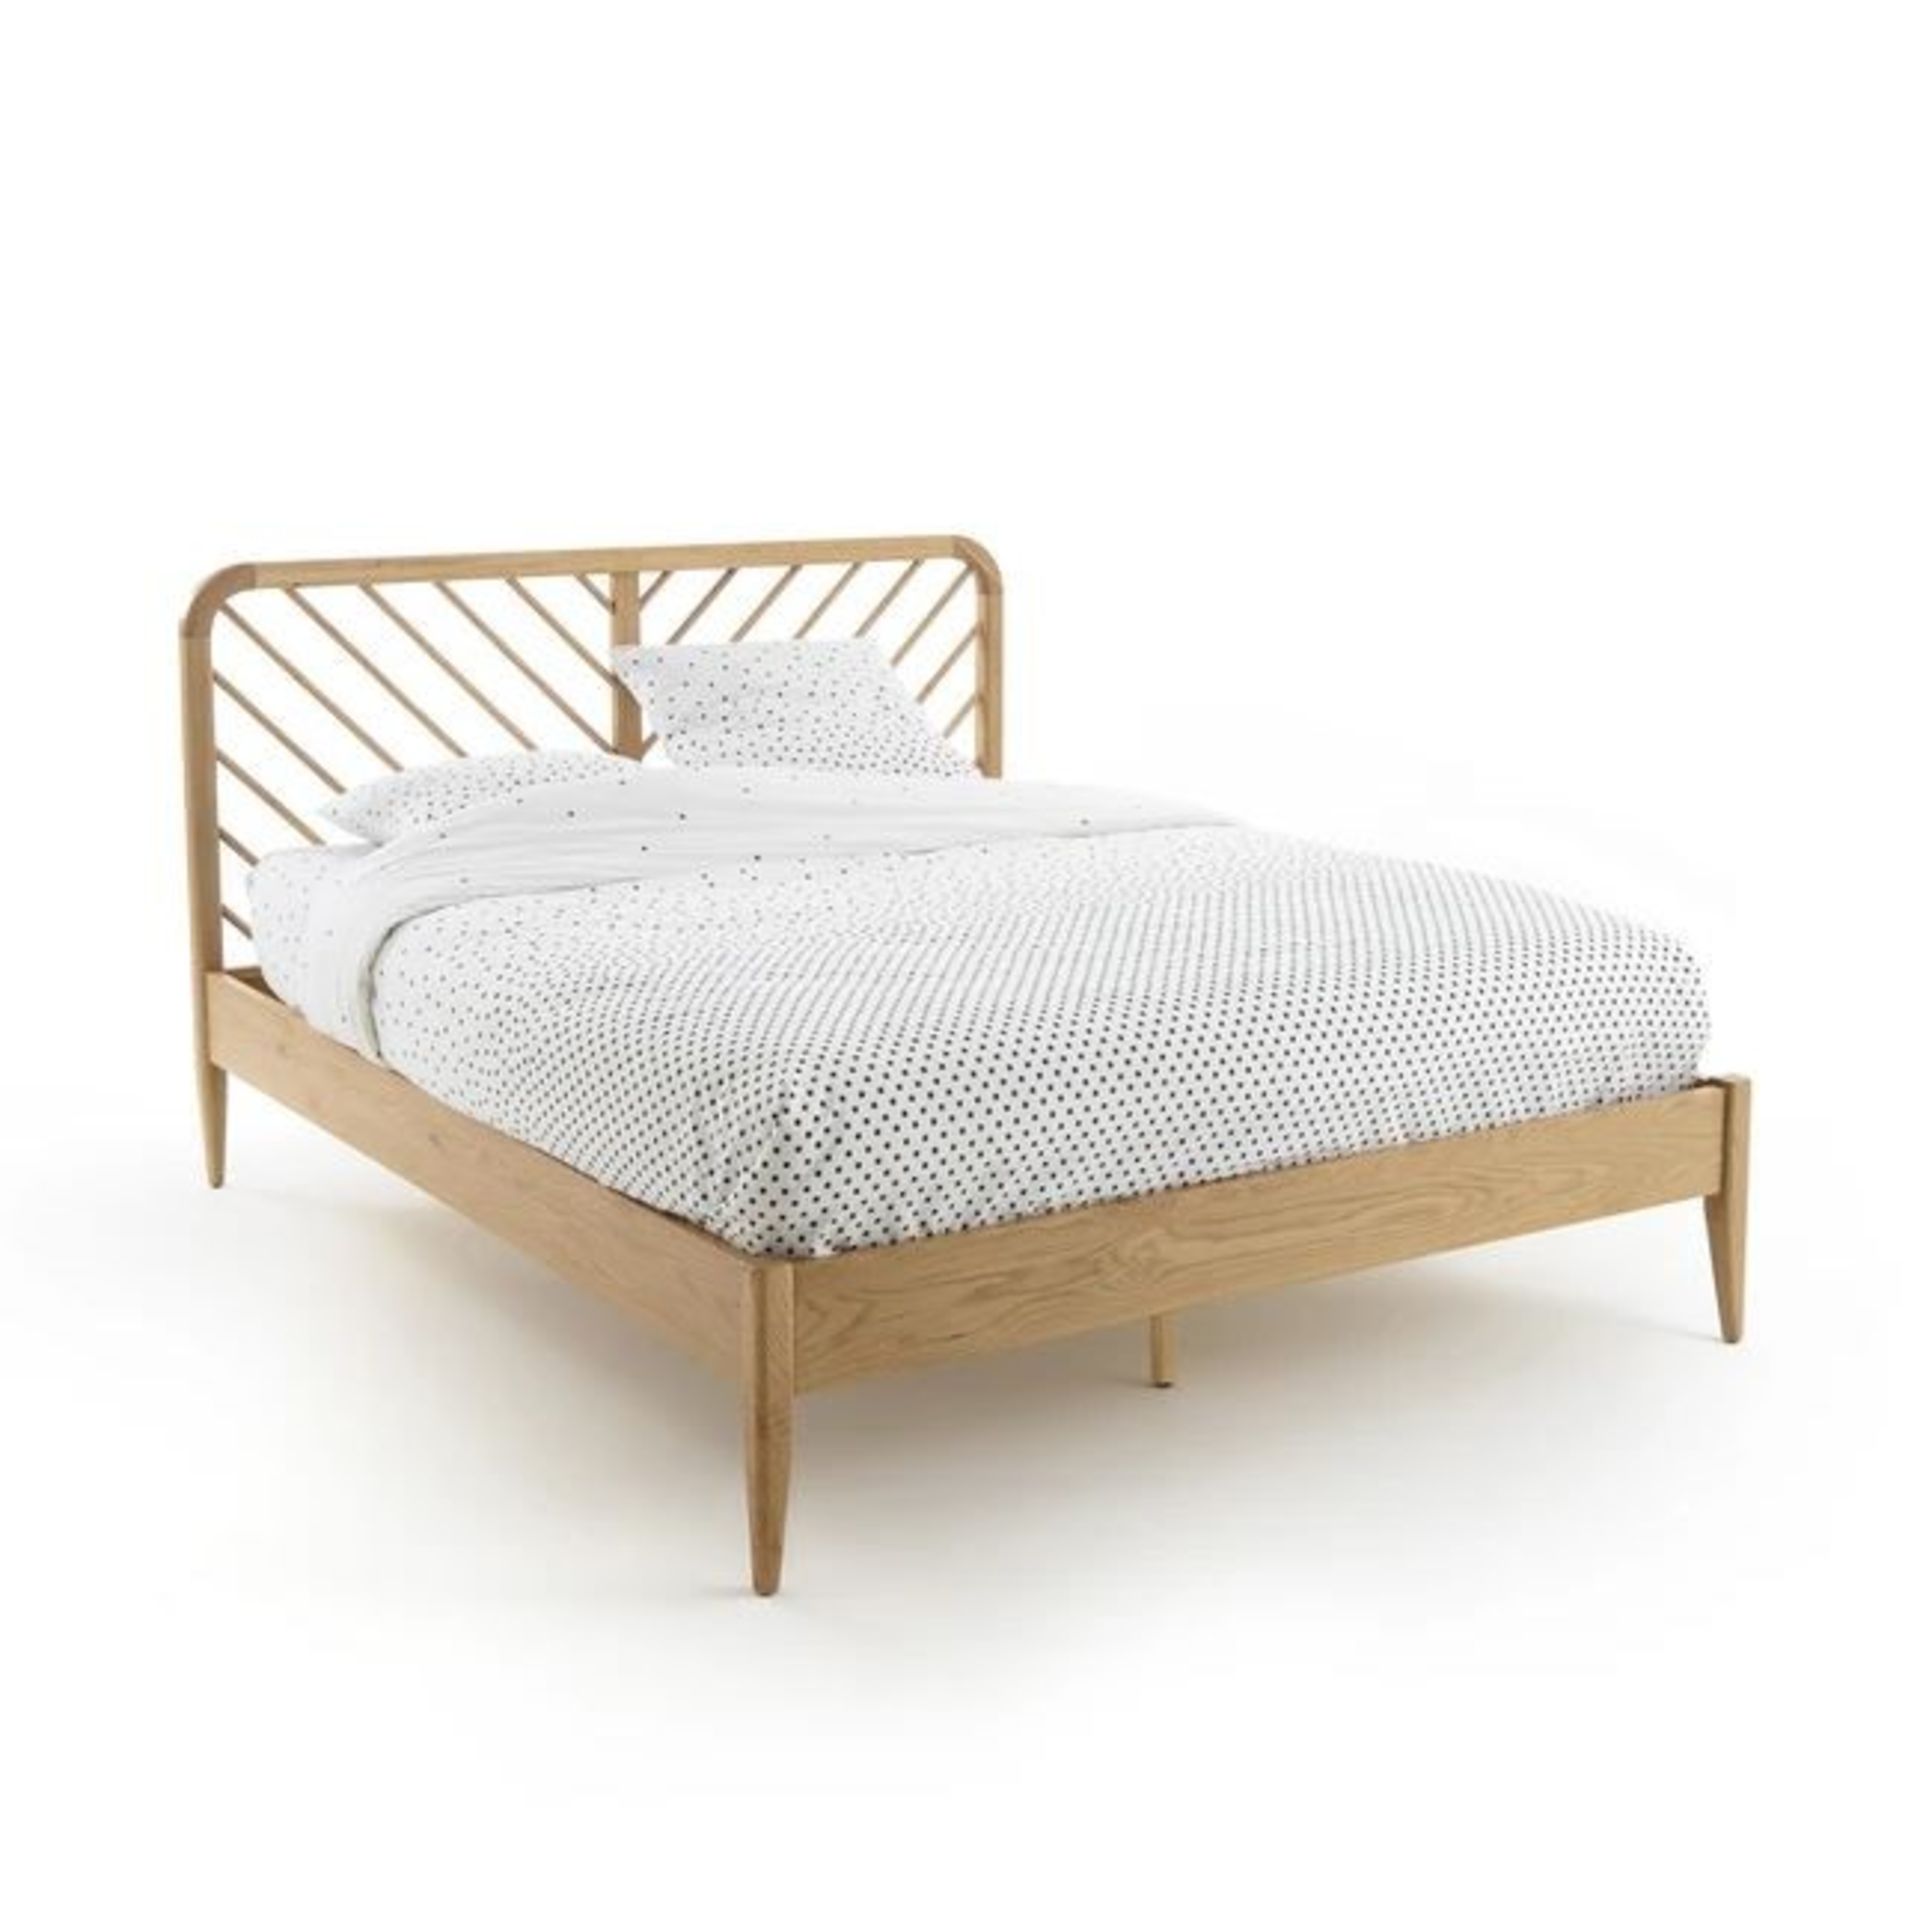 LA REDOUTE ANDA SOLID OAK BED WITH BASE / SIZE: KING 160 X 200CM